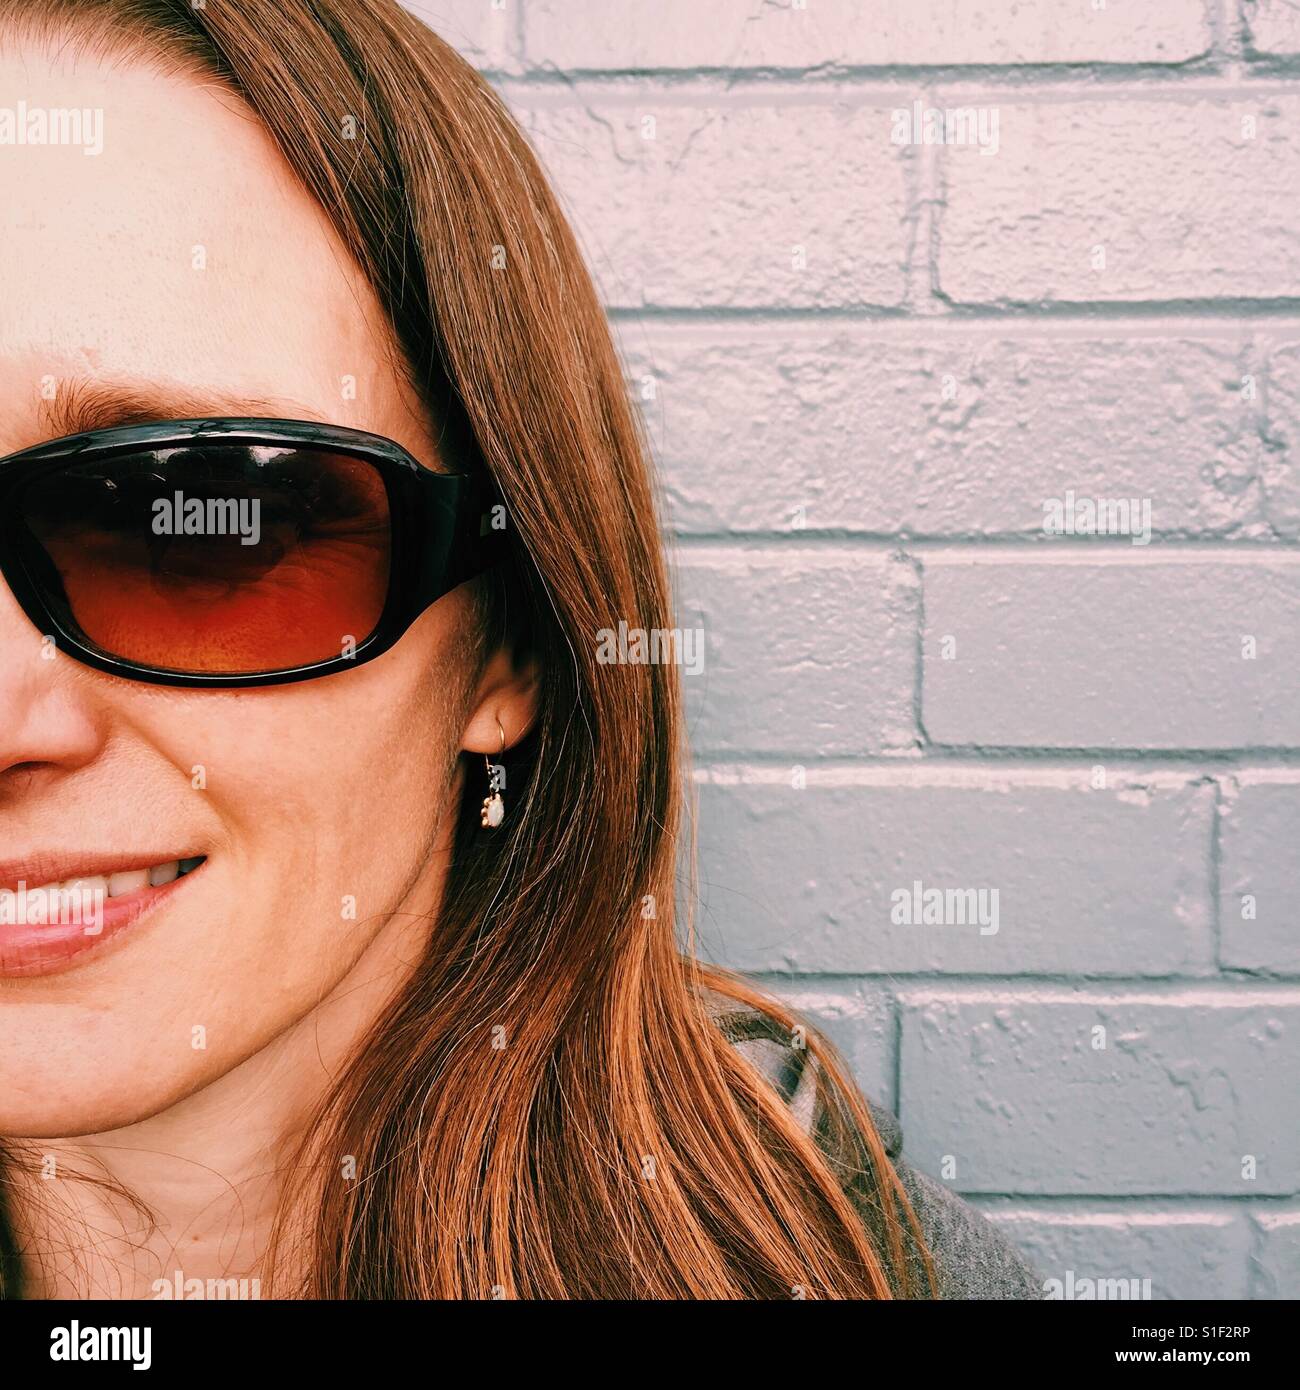 A cropped close up portrait of a smiling 40 something female shot against a brick background Stock Photo